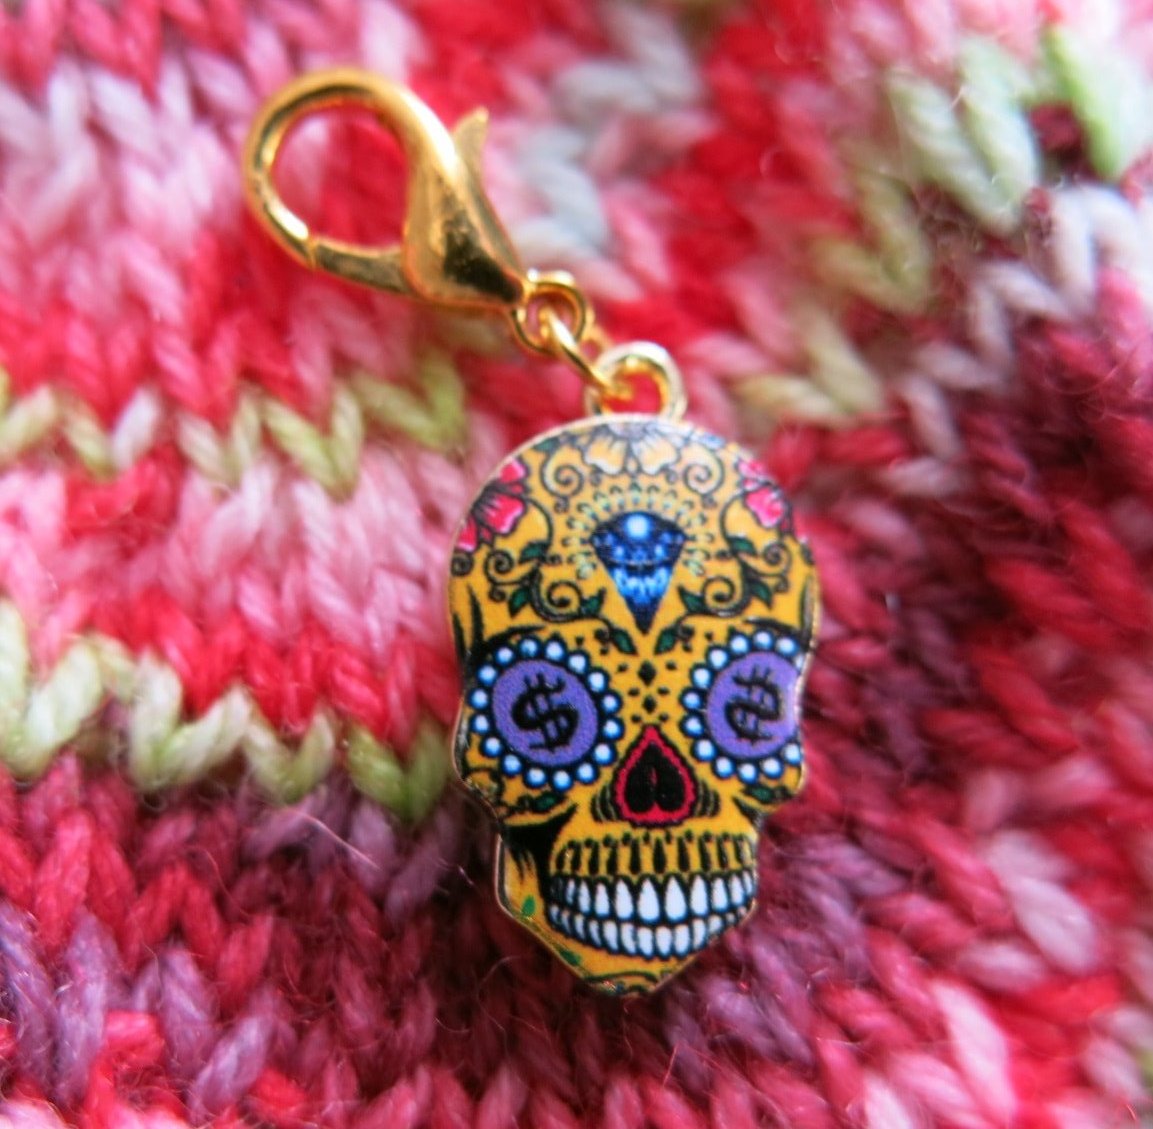 yellow dollar sign sugar skull charm for place keeping in crochet